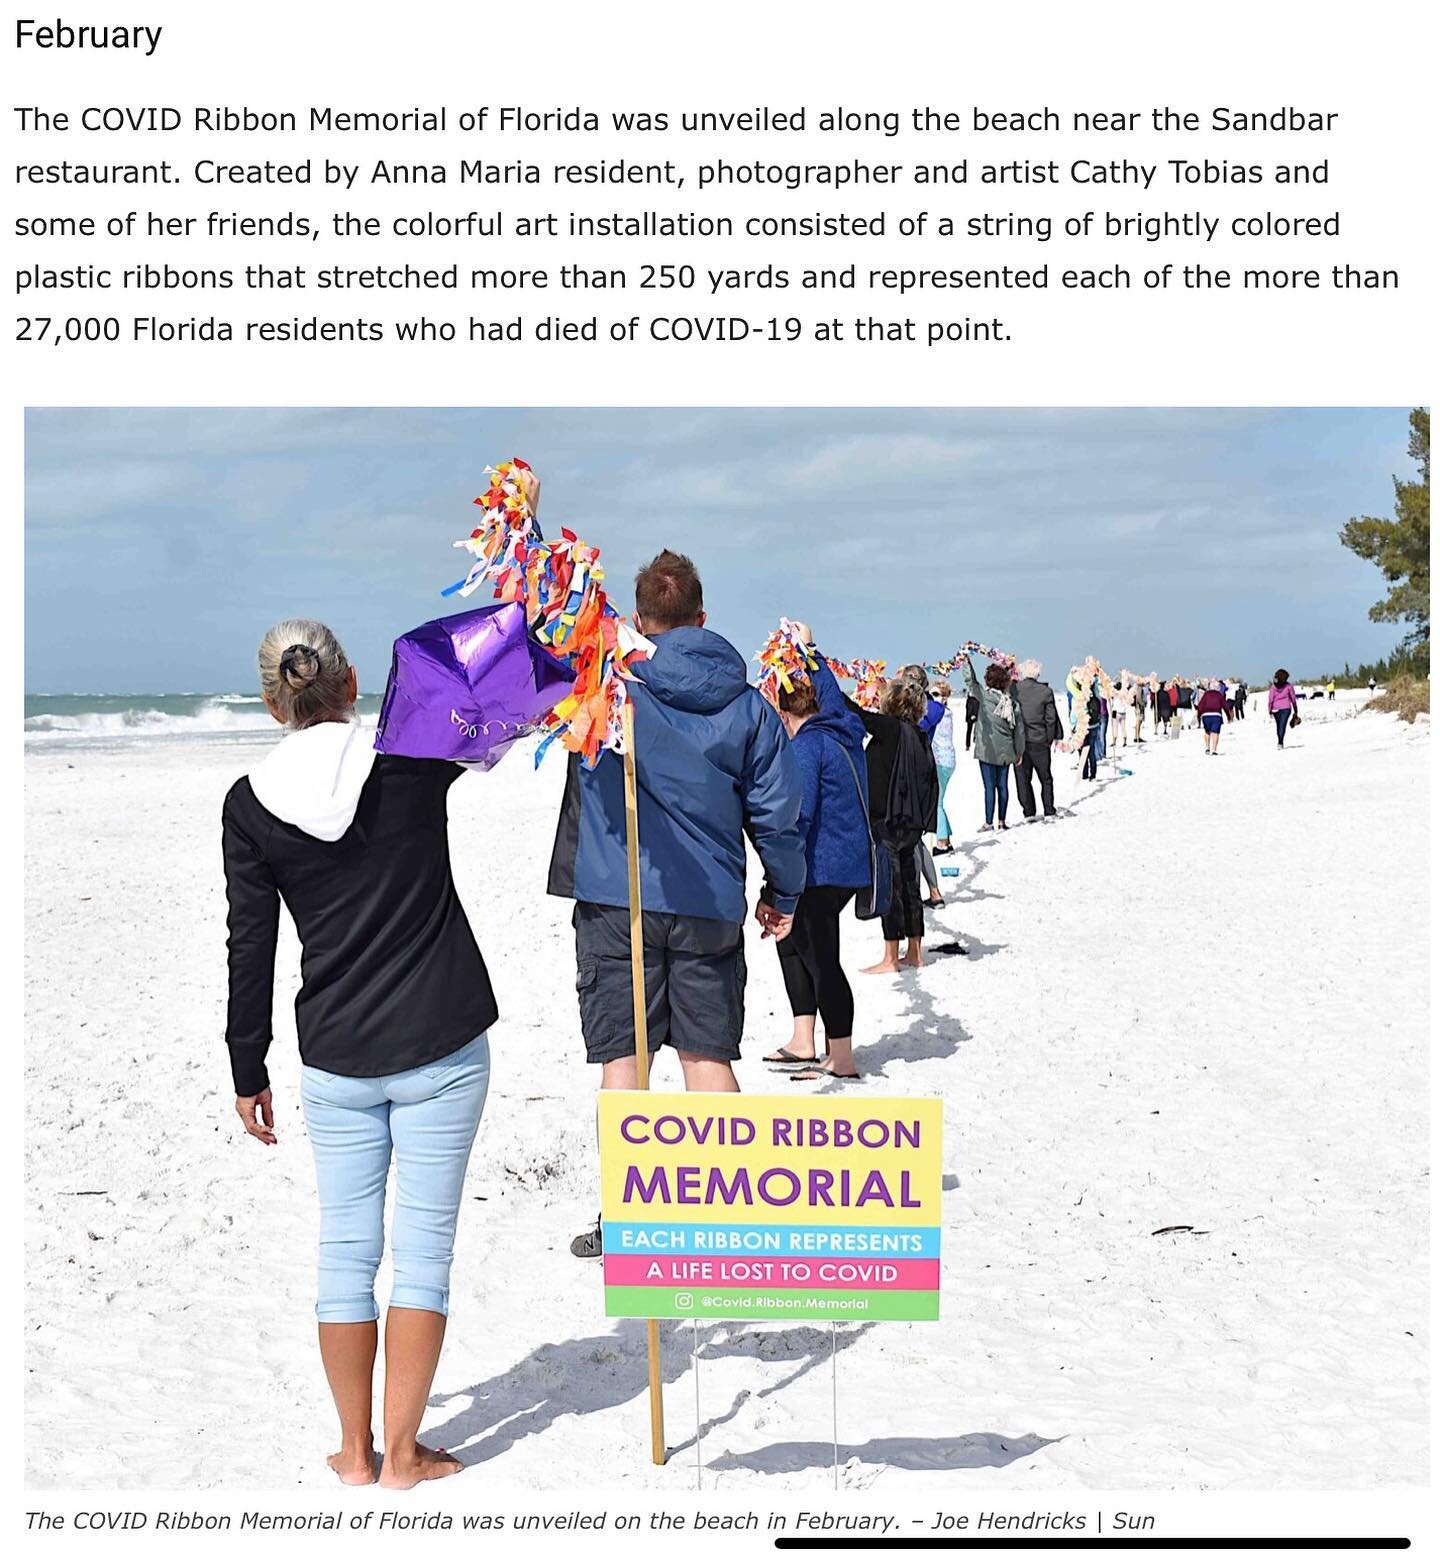 Anna Maria: The Year in Review, Anna Maria Island Sun, Jan. 4, 2022 edition, by reporter Joe Hendricks. 
In February, 2021, the Covid Ribbon Memorial was 27,000 ribbons, and today, nearly a year later, there are over 62,000 ribbons, each representing